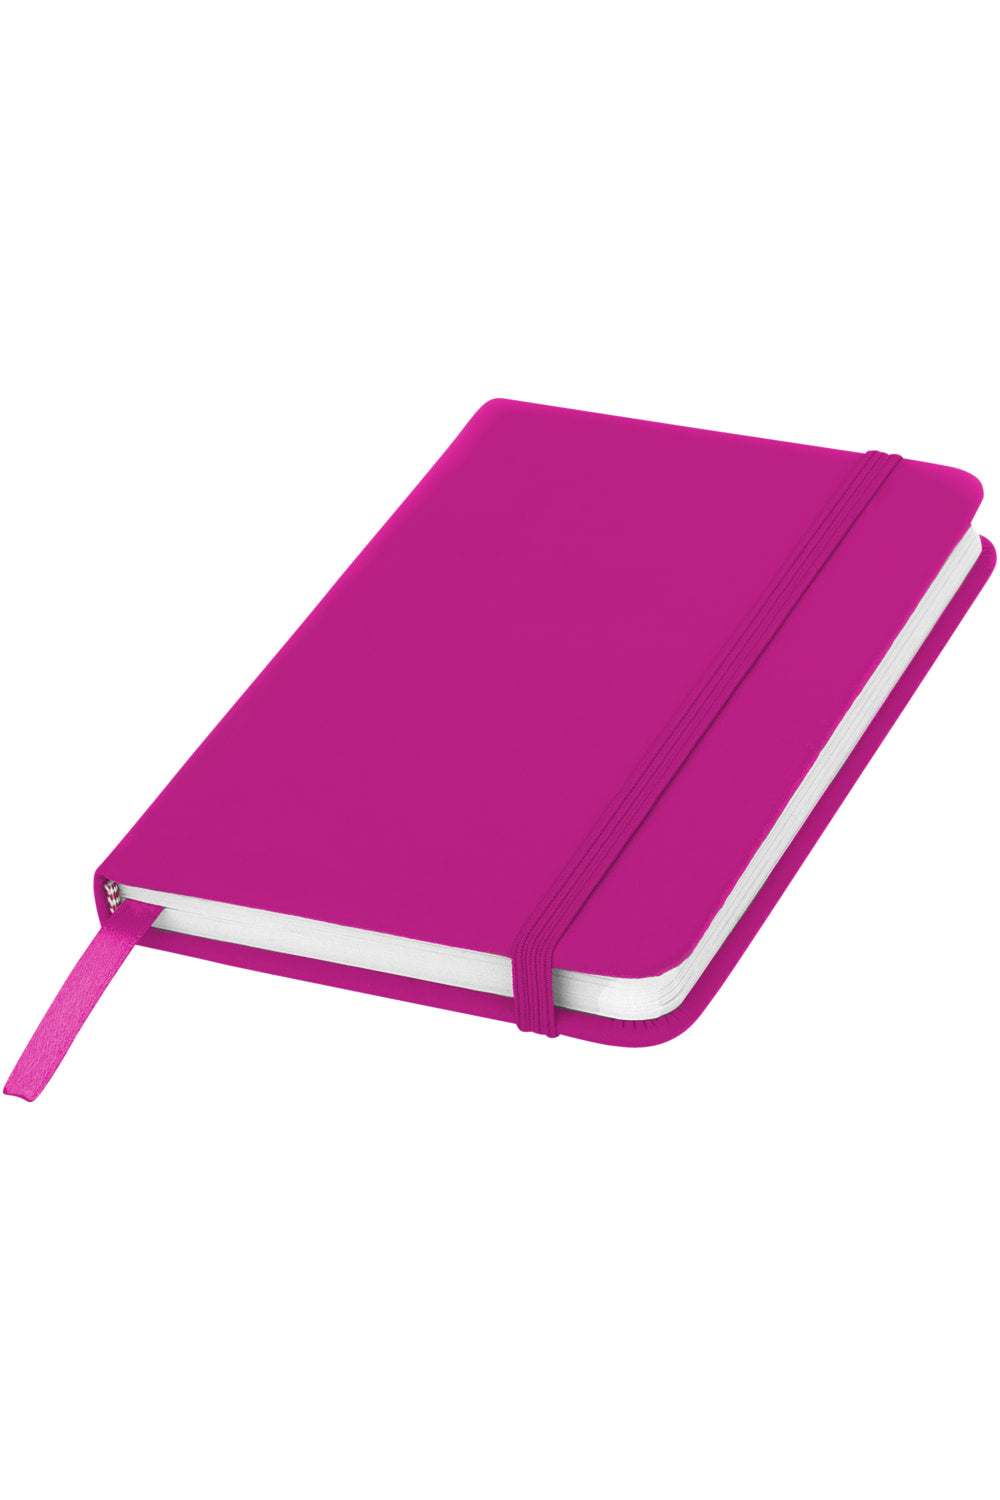 Bullet Spectrum A6 Notebook (Pink) (5.5 x 3.5 x 0.5 inches)